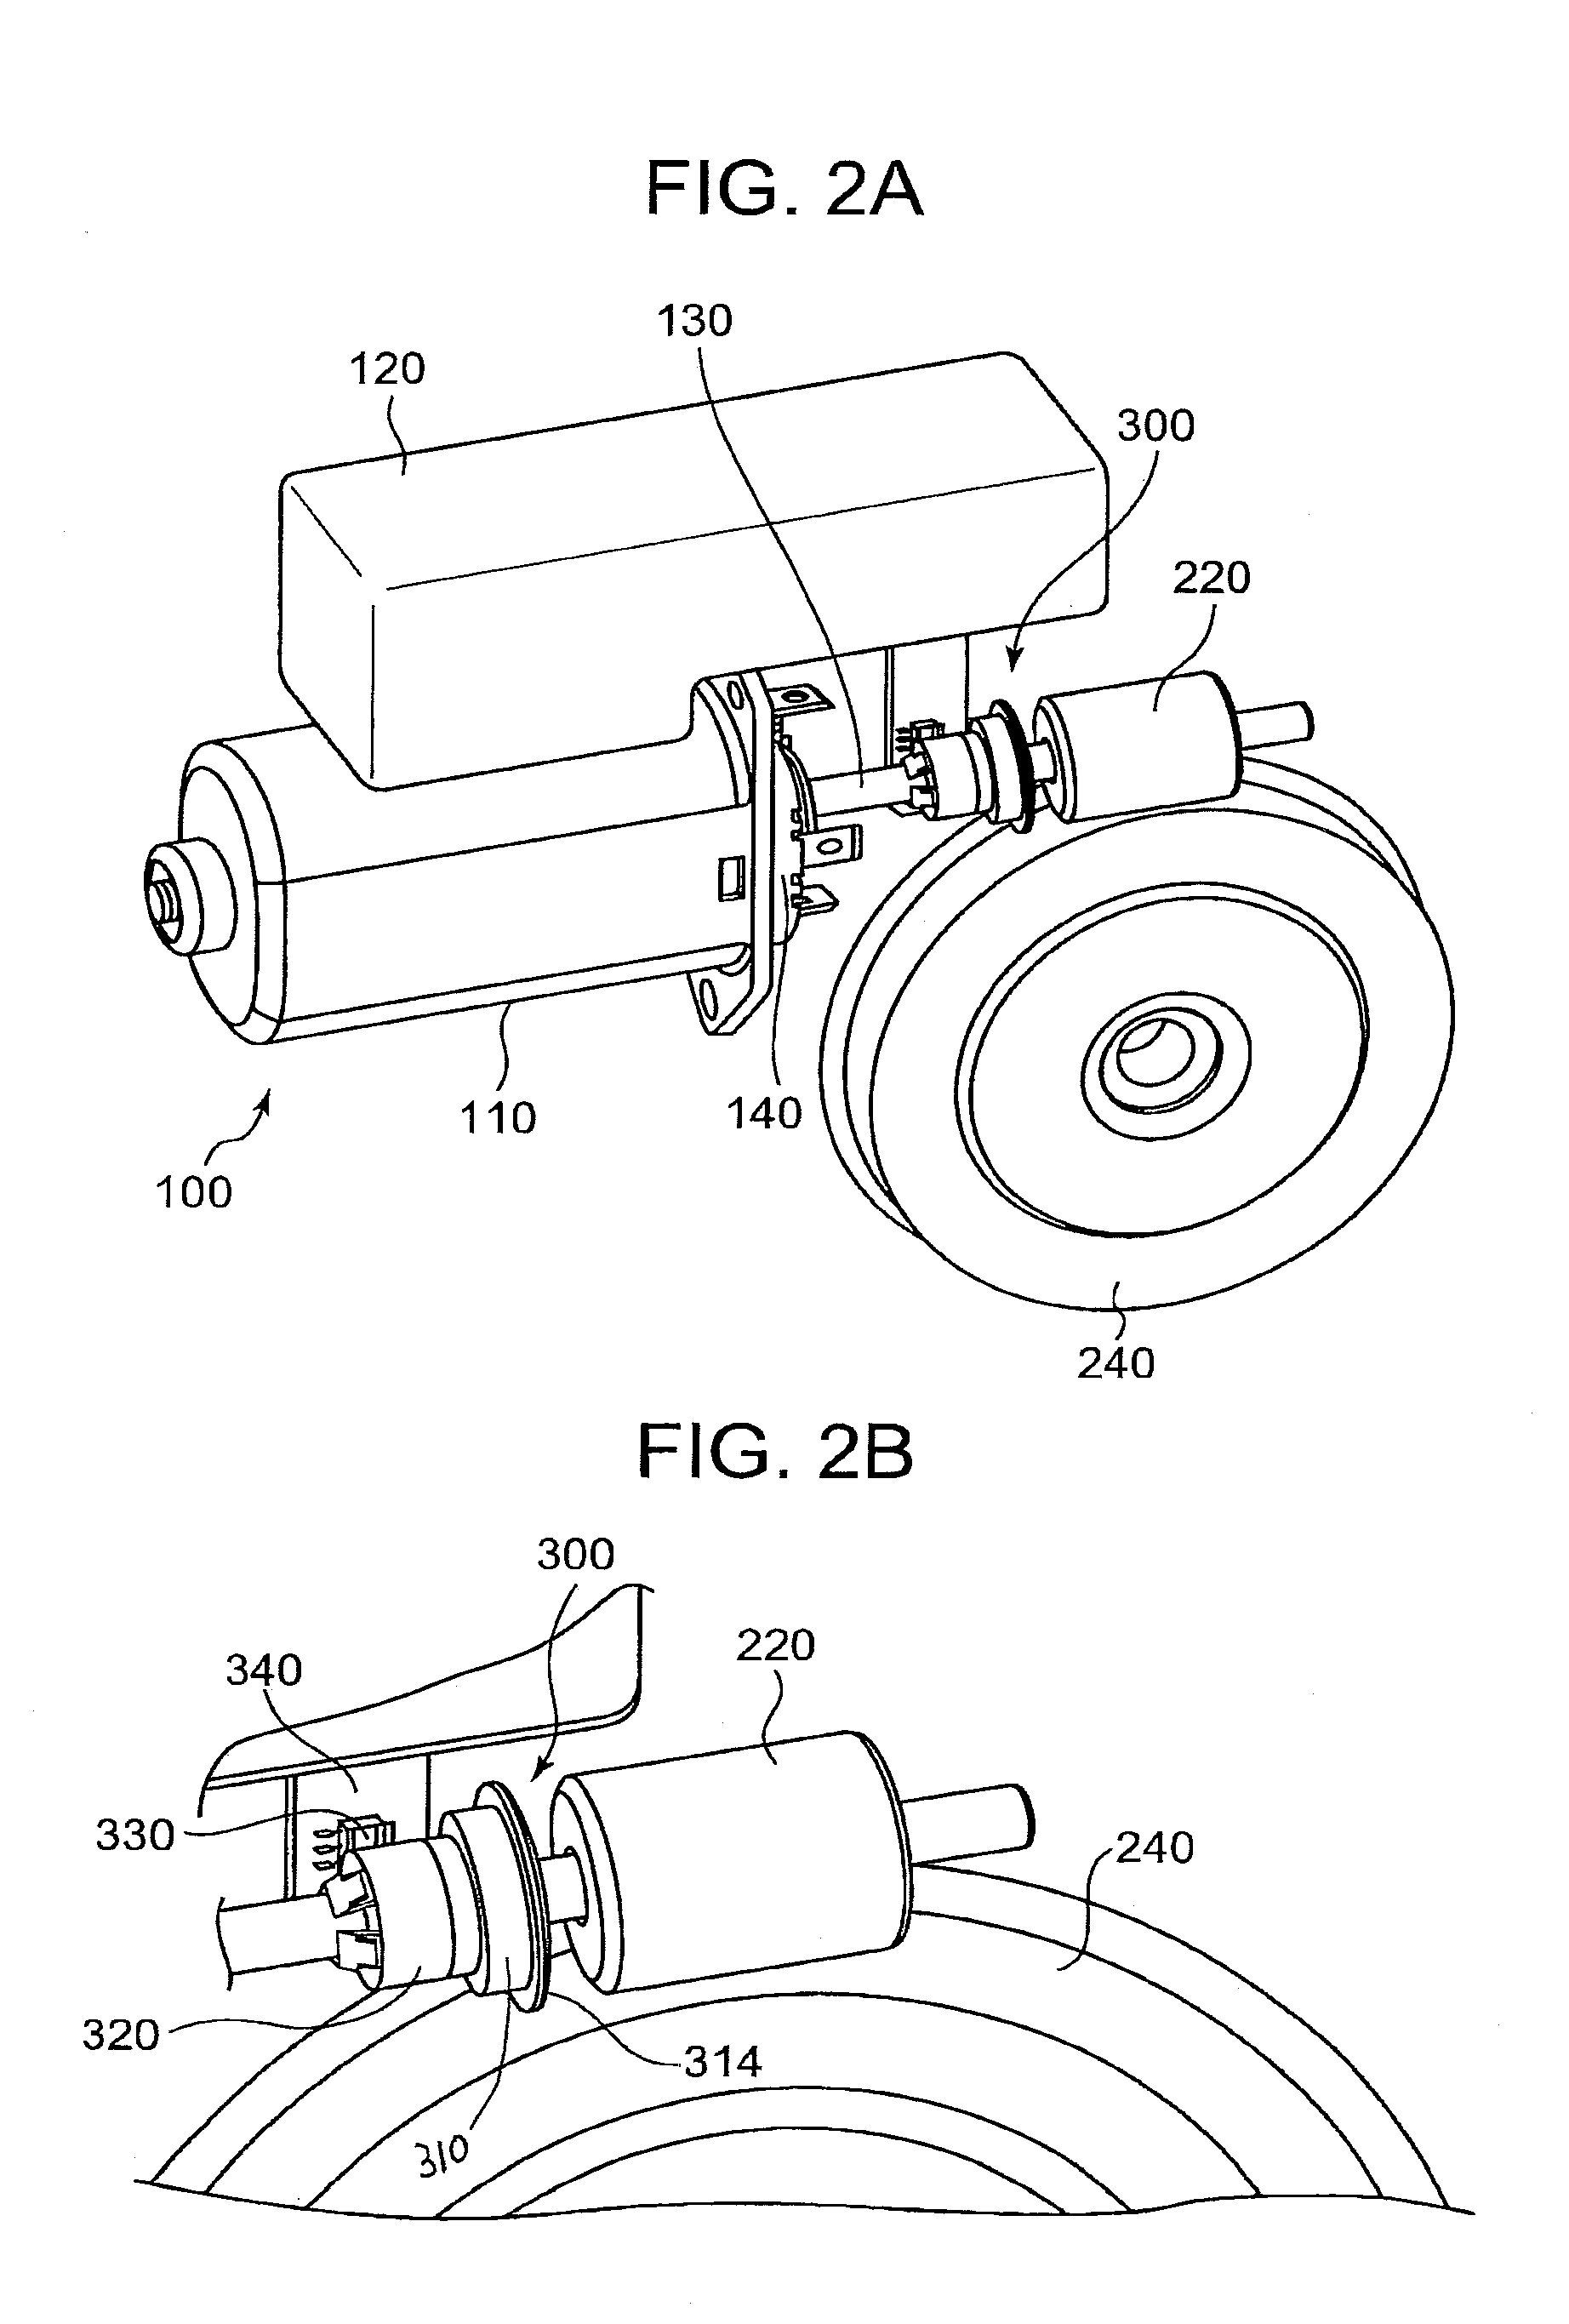 Sensor magnet holder for use in motor and its manufacturing process